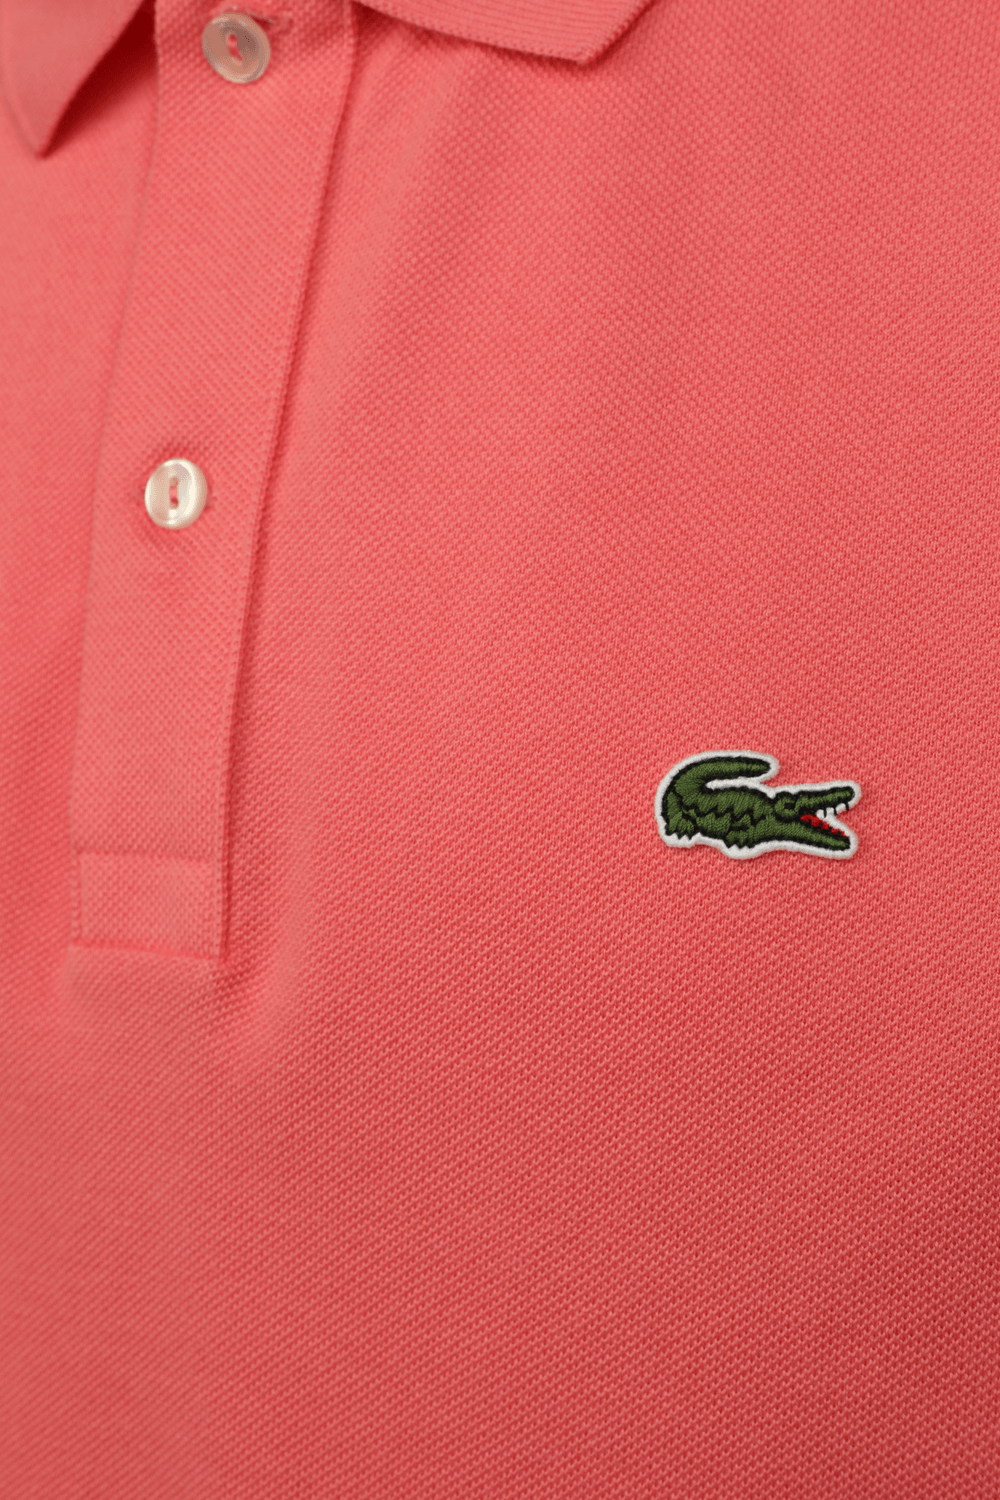 Slim Fit Polo Shirt In Pink LACOSTE